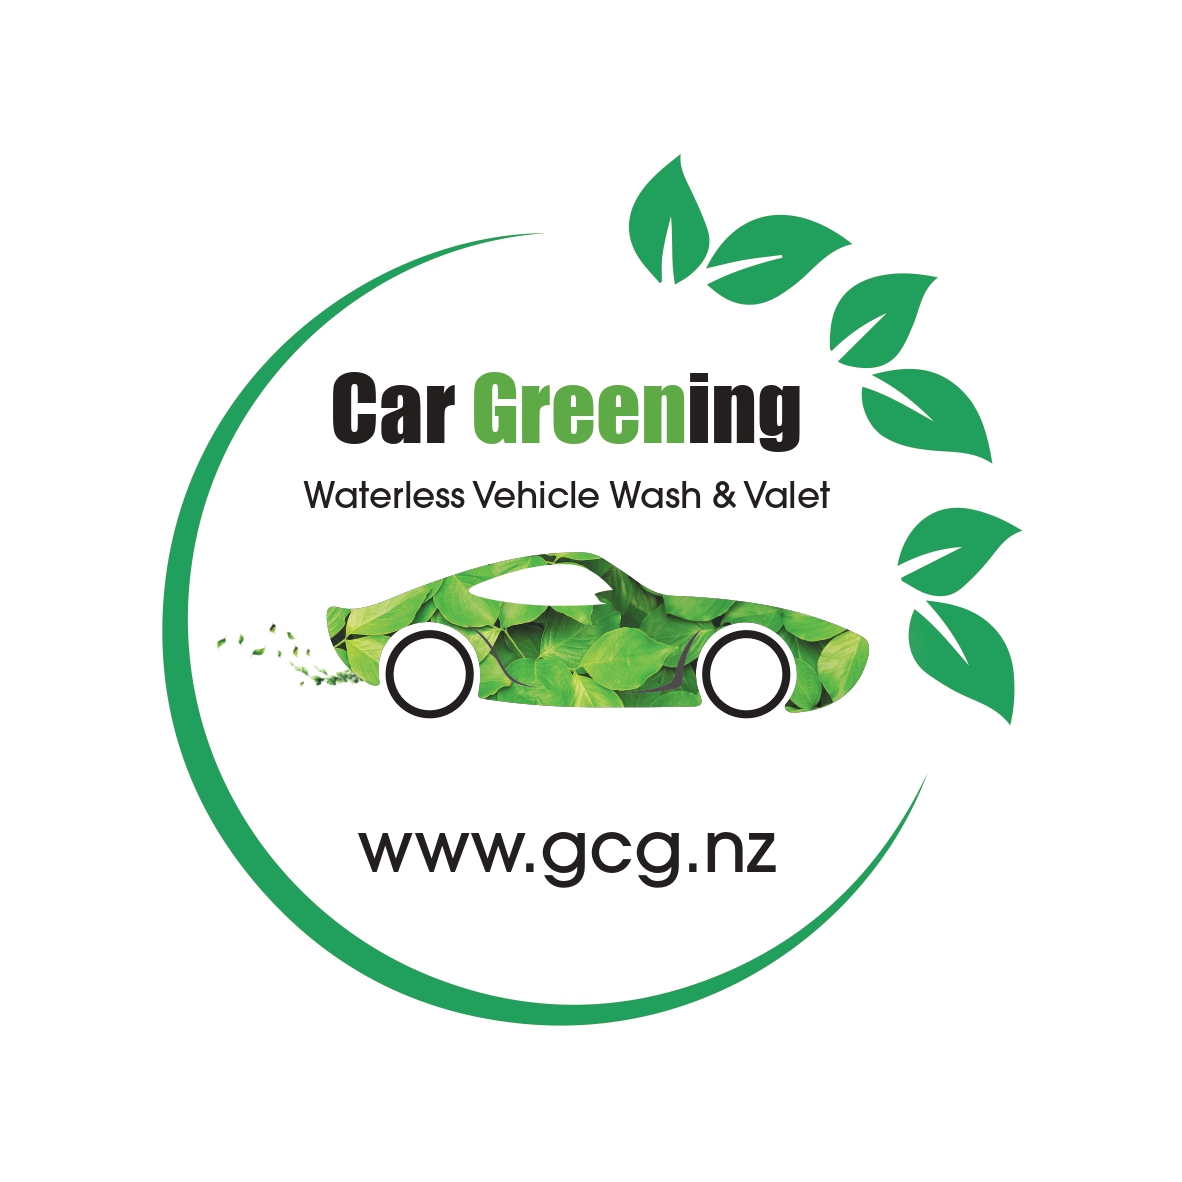 cargreening_1_no-outline-web-add-use-for-mainlocation-signage-_page-0001-1.jpg